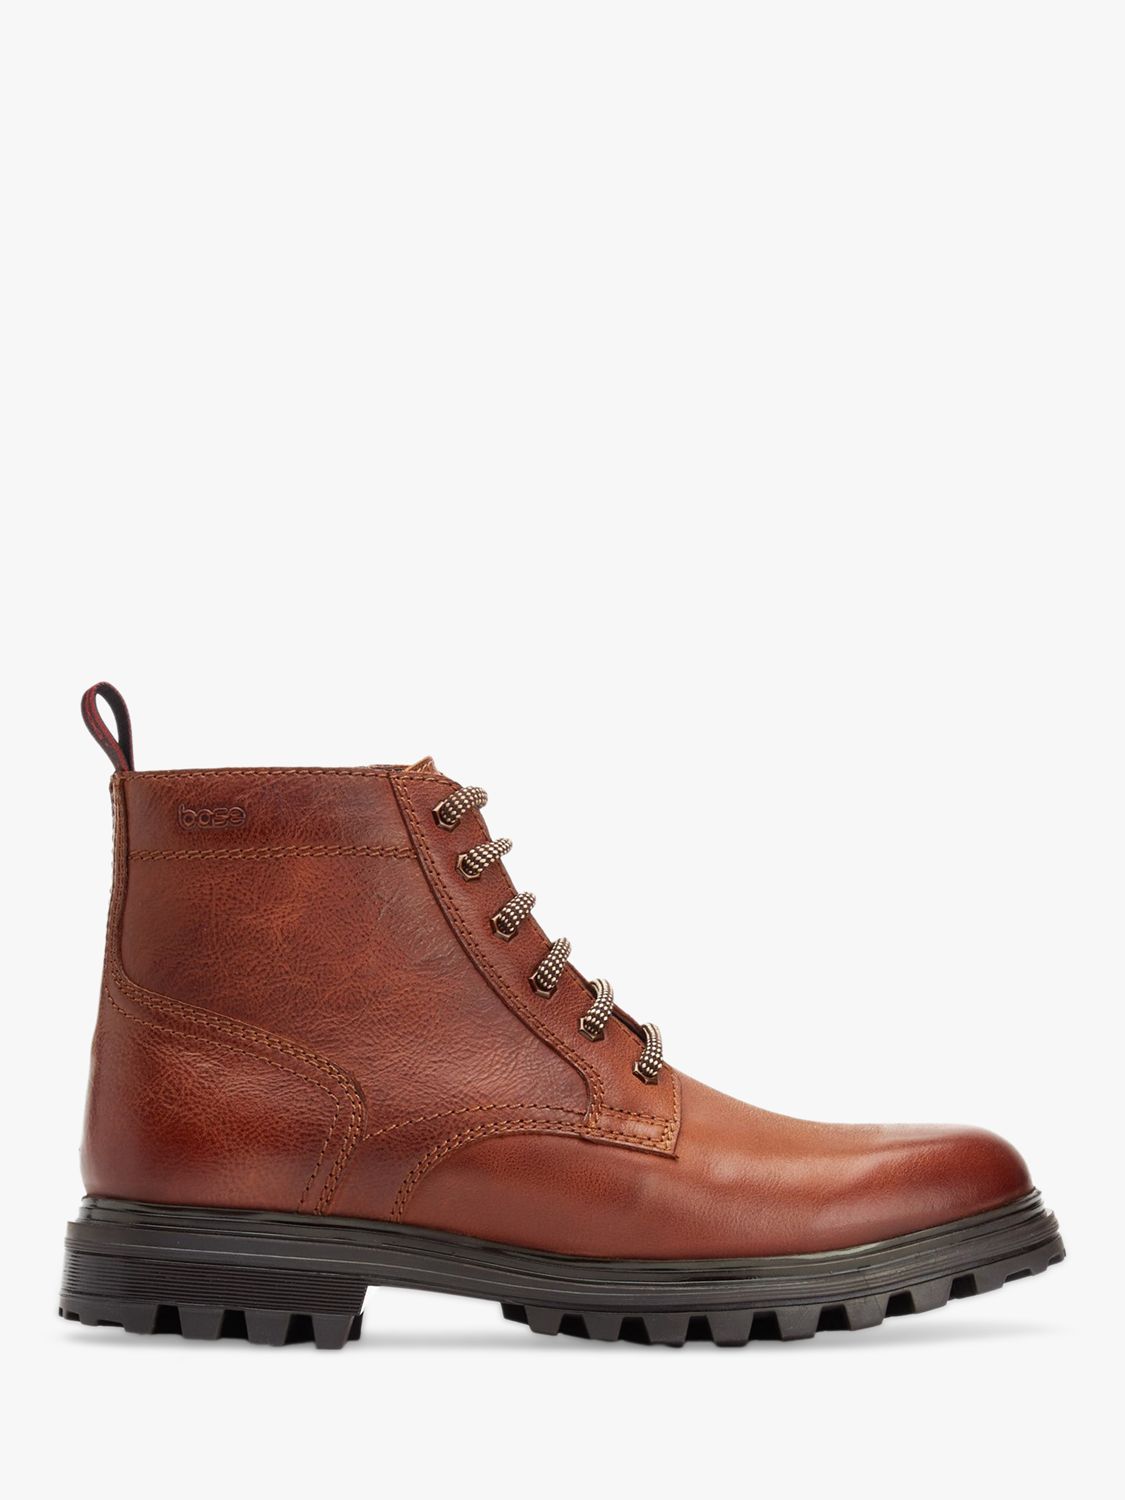 Base London Brooklyn Leather Lace Up Boots, Tan at John Lewis & Partners